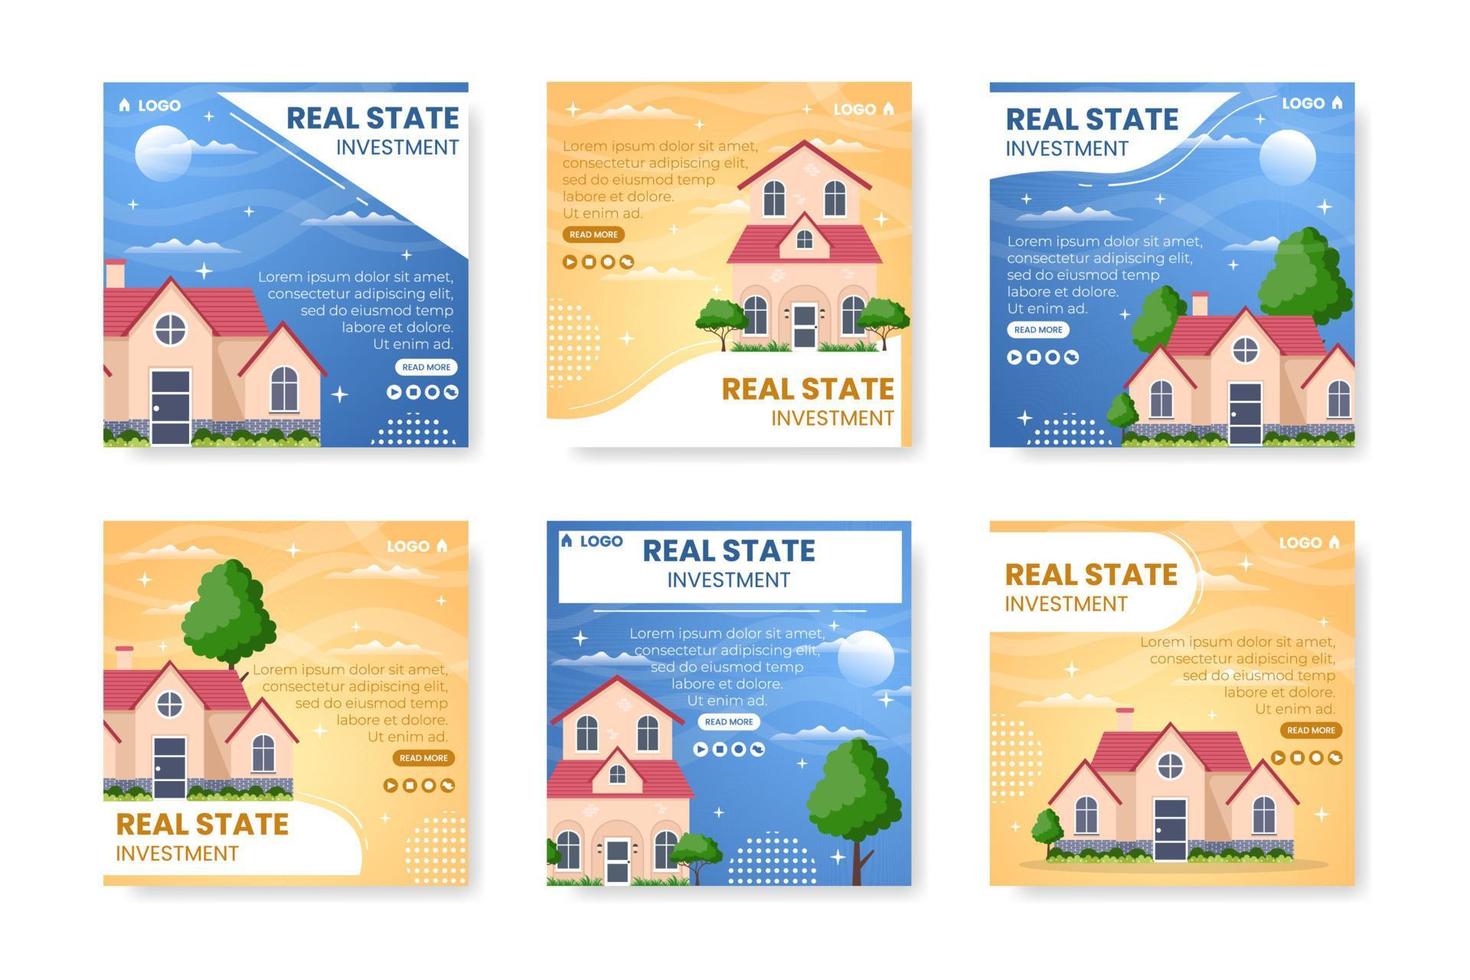 Real Estate Investment Post Template Flat Design Illustration Editable of Square Background Suitable for Social media, Greeting Card and Web Internet Ads vector